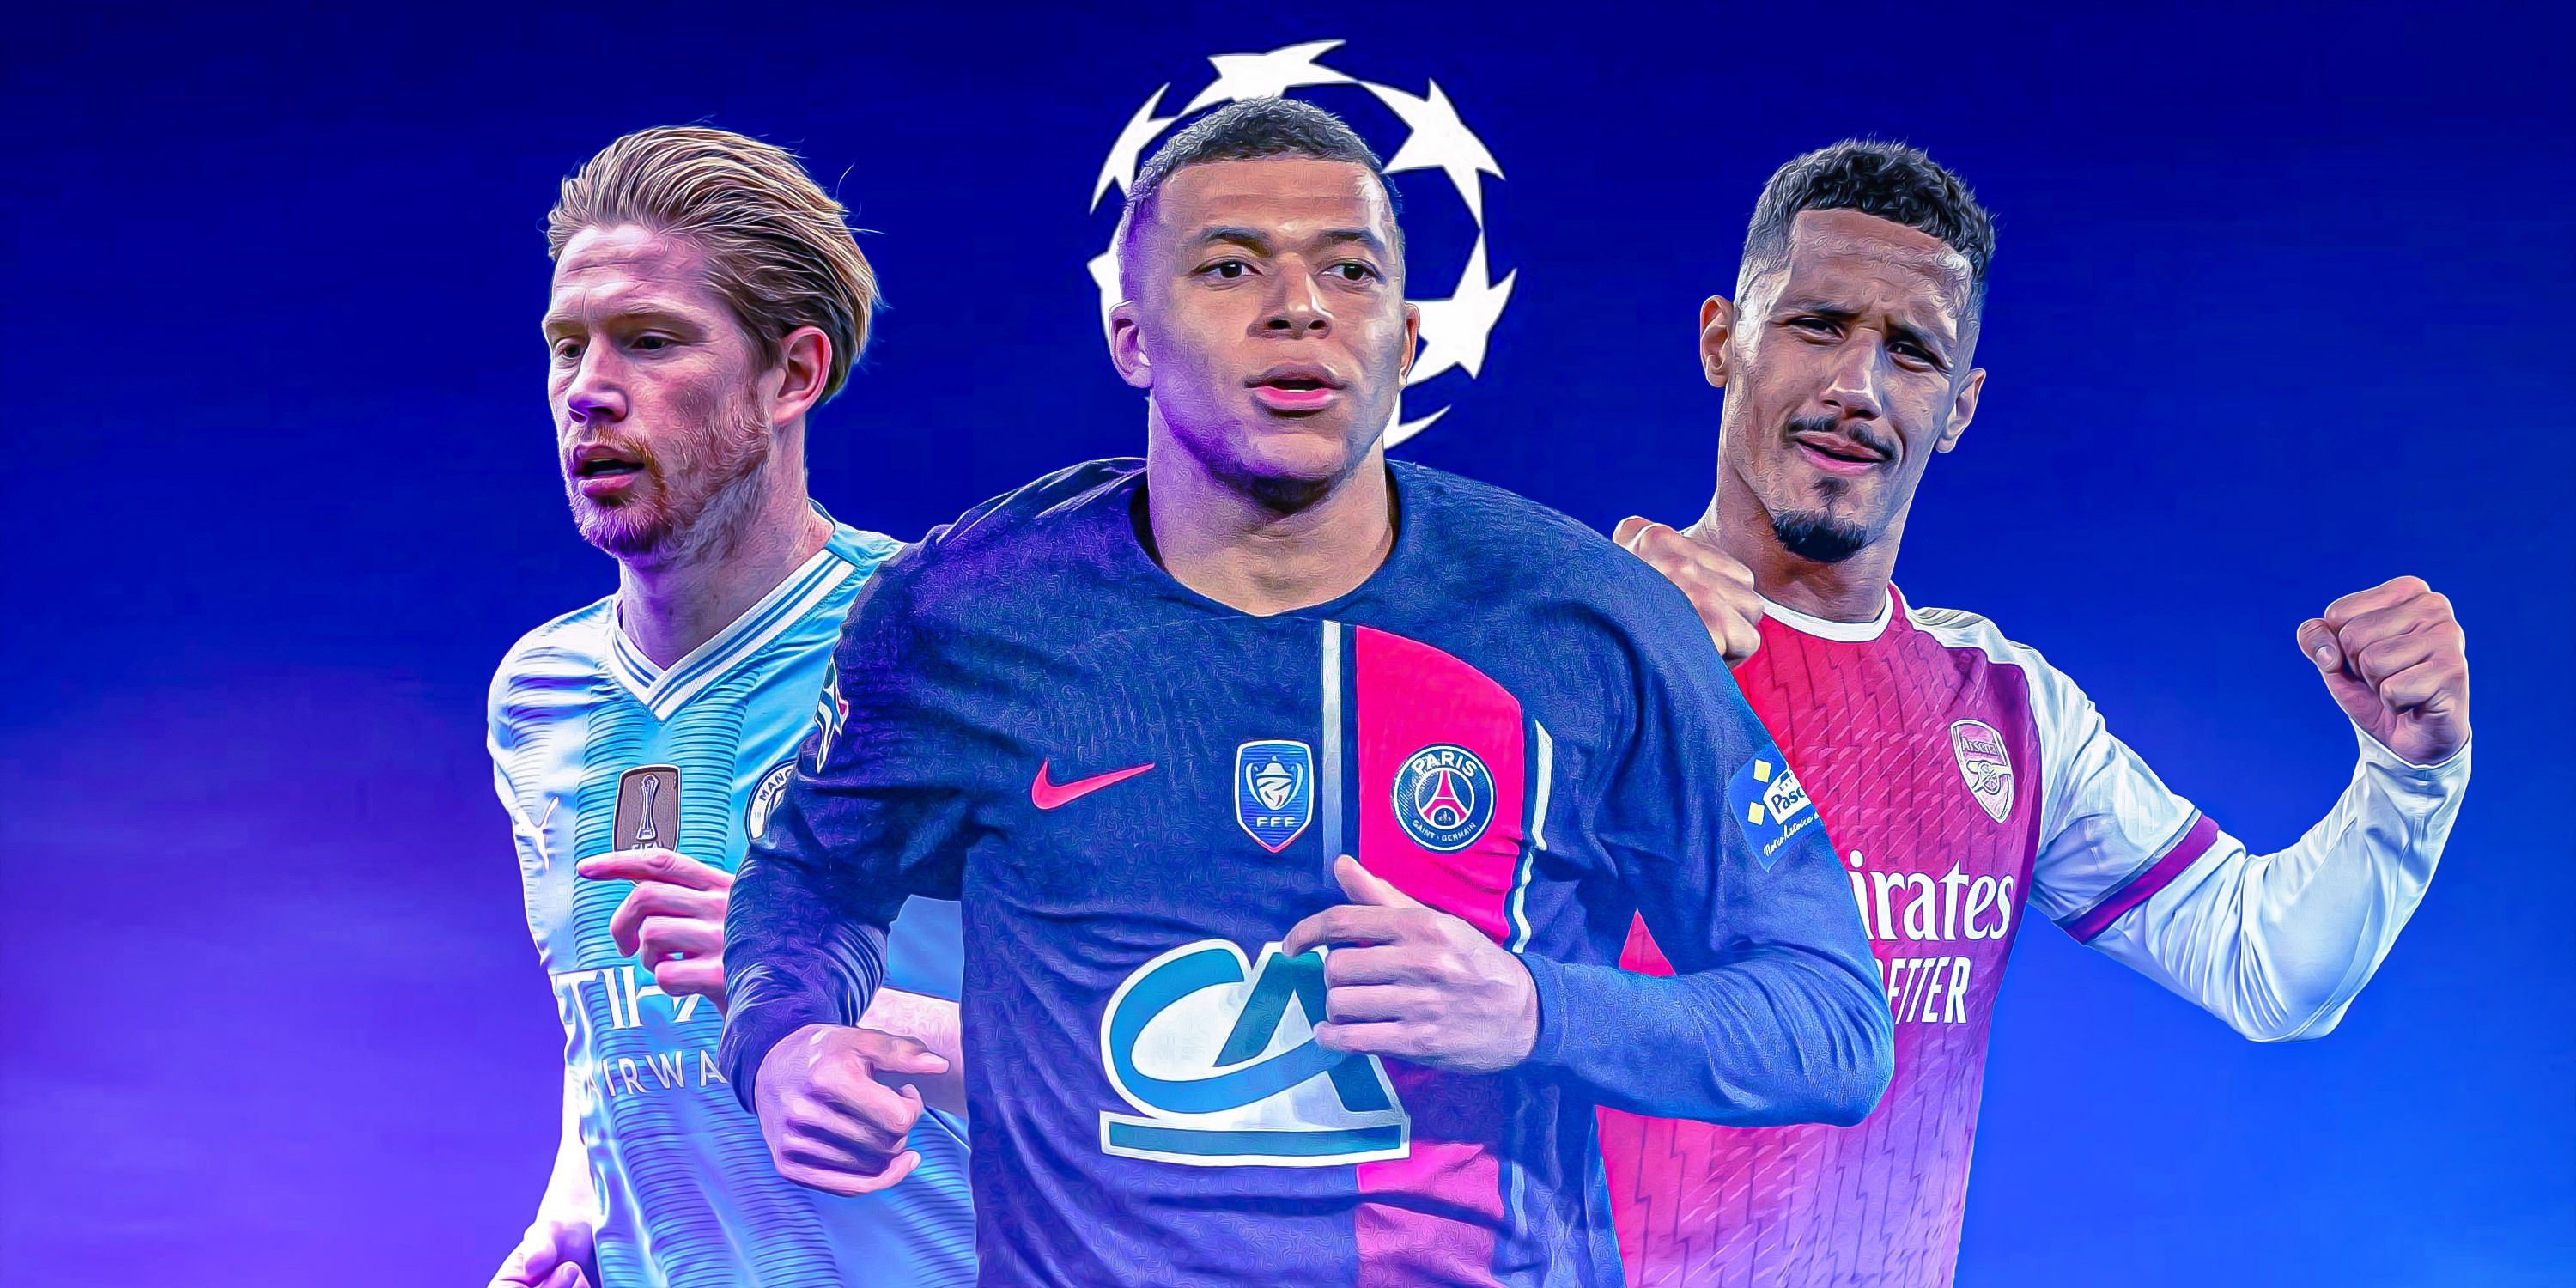 Manchester City's Kevin De Bruyne, PSG's Kylian Mbappe, and Arsenal's William Saliba.